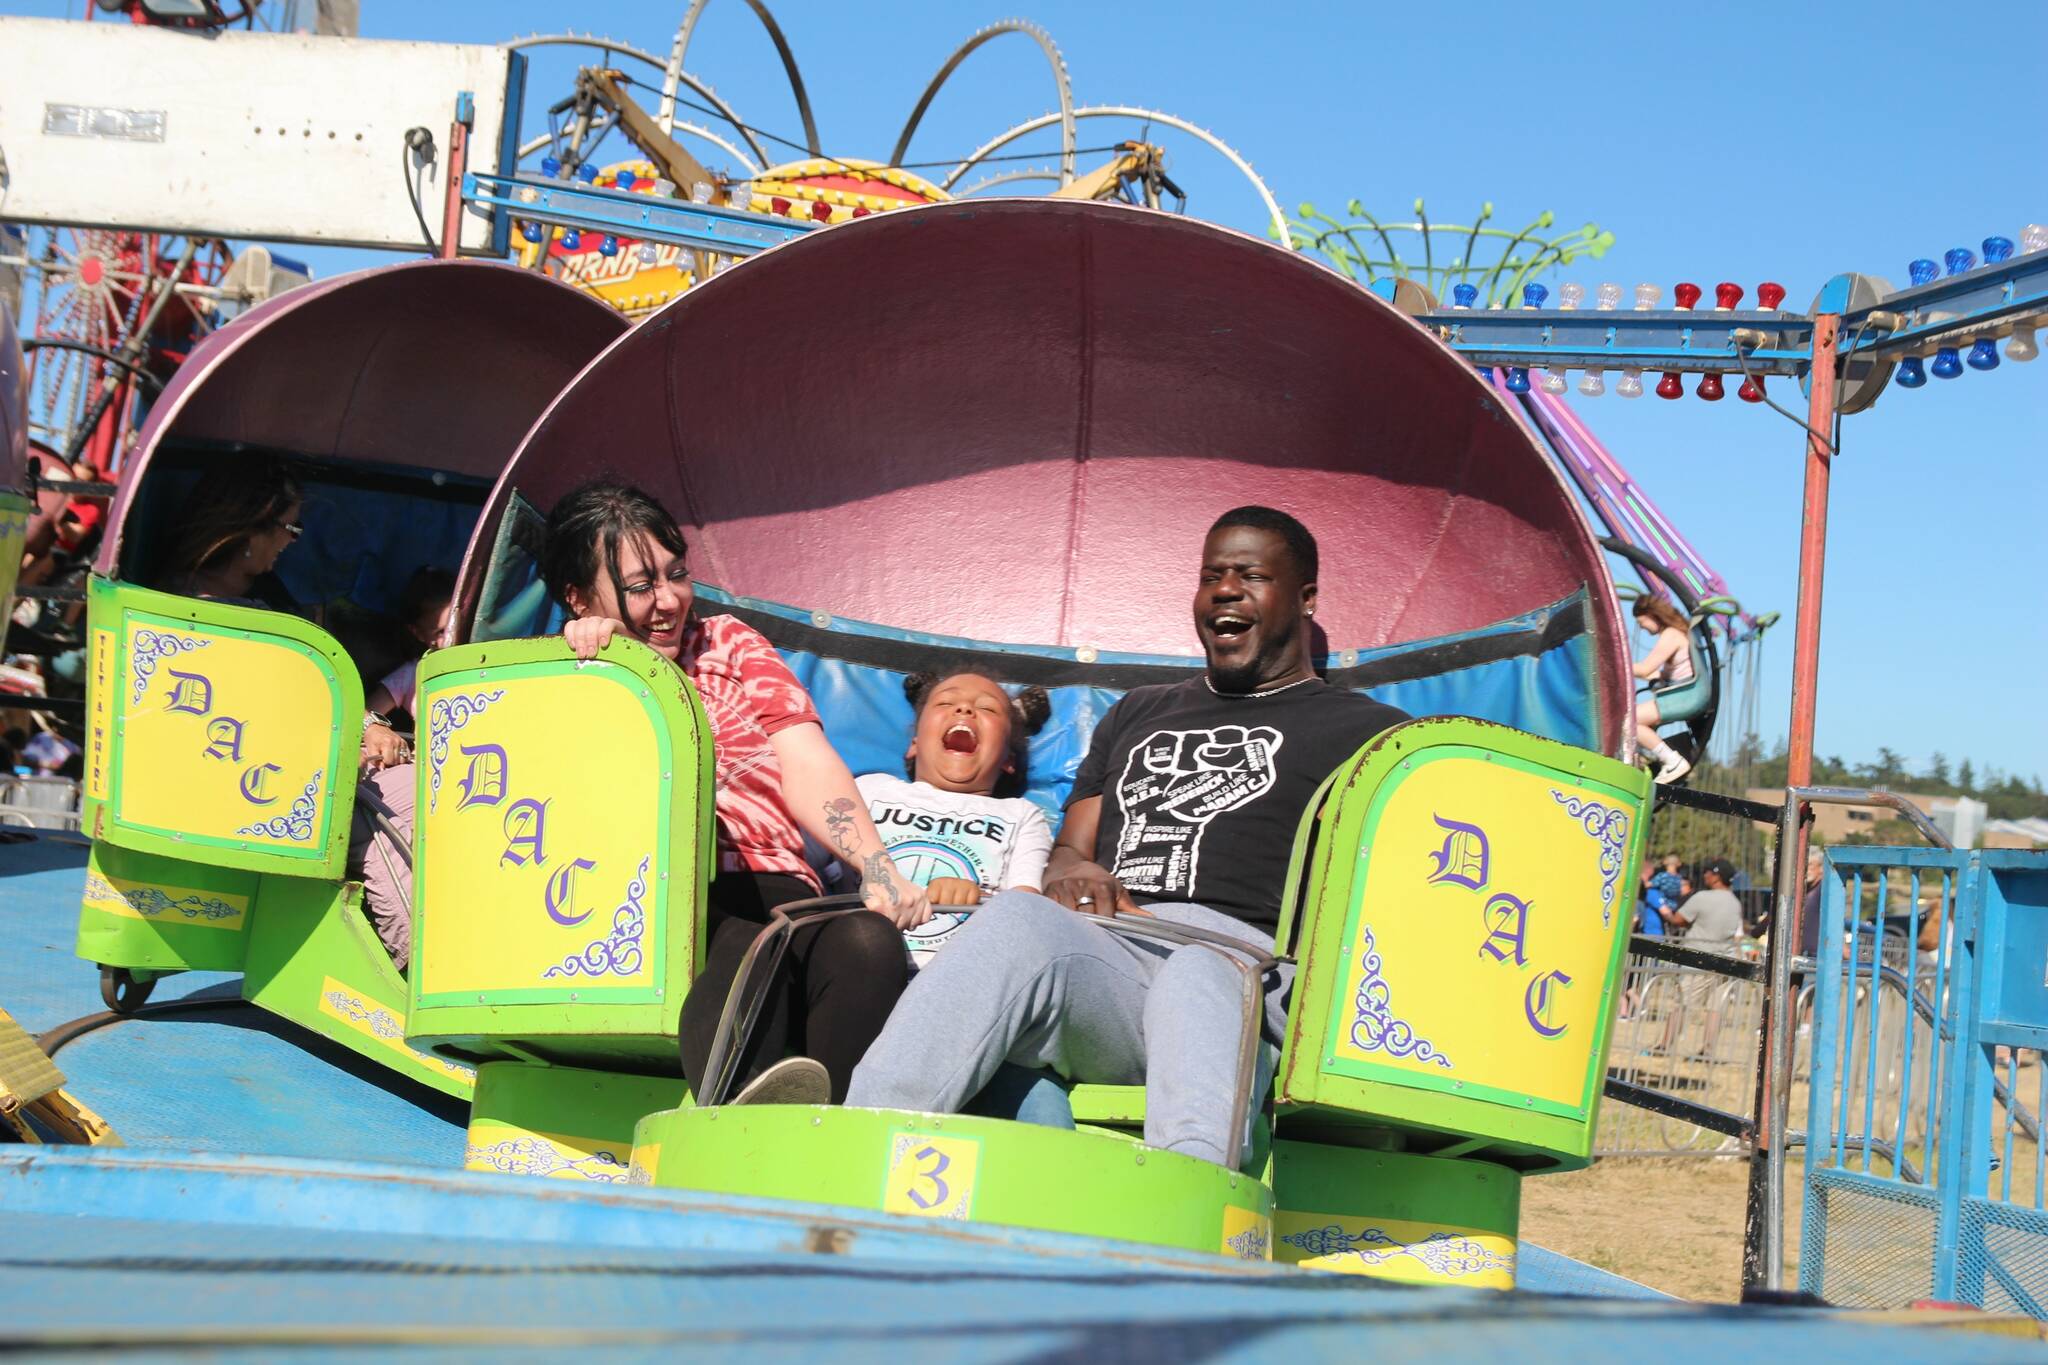 A family has fun spinning at the carnival. (Photo by Luisa Loi / Whidbey News-Times)